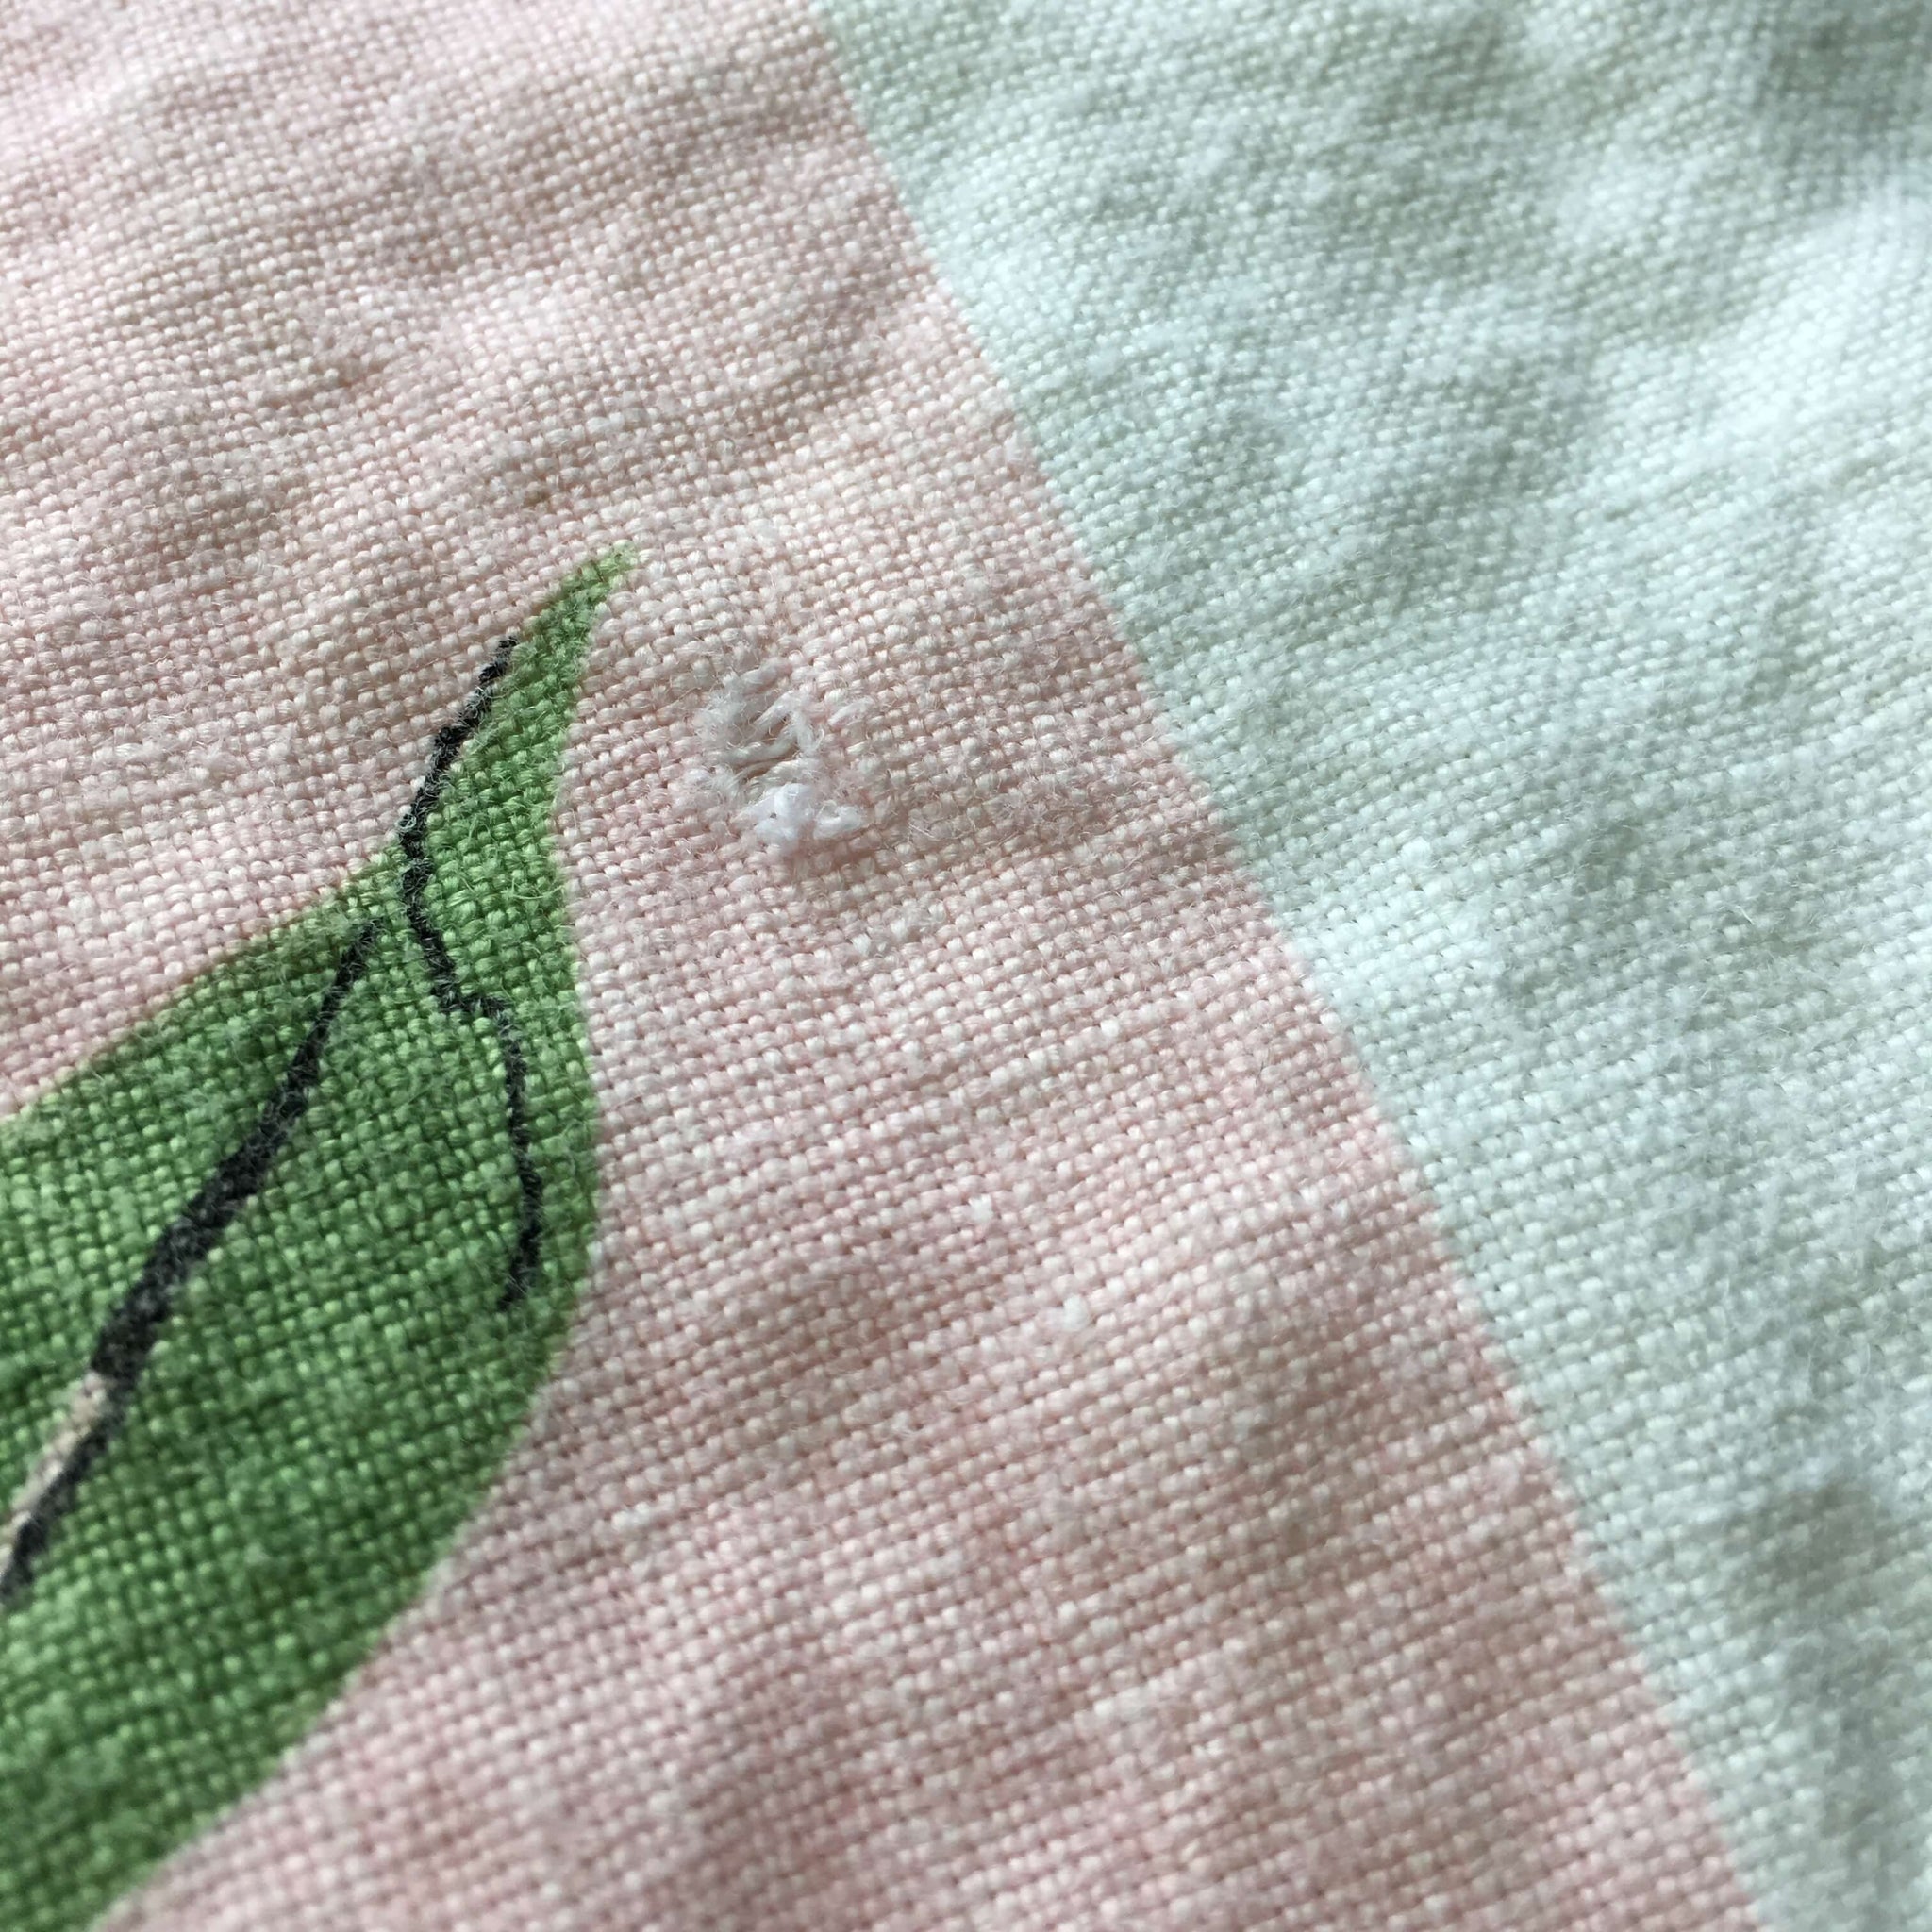 Vintage Pink Green and White Floral Tablecloth - 48x63 - Linen Fabric